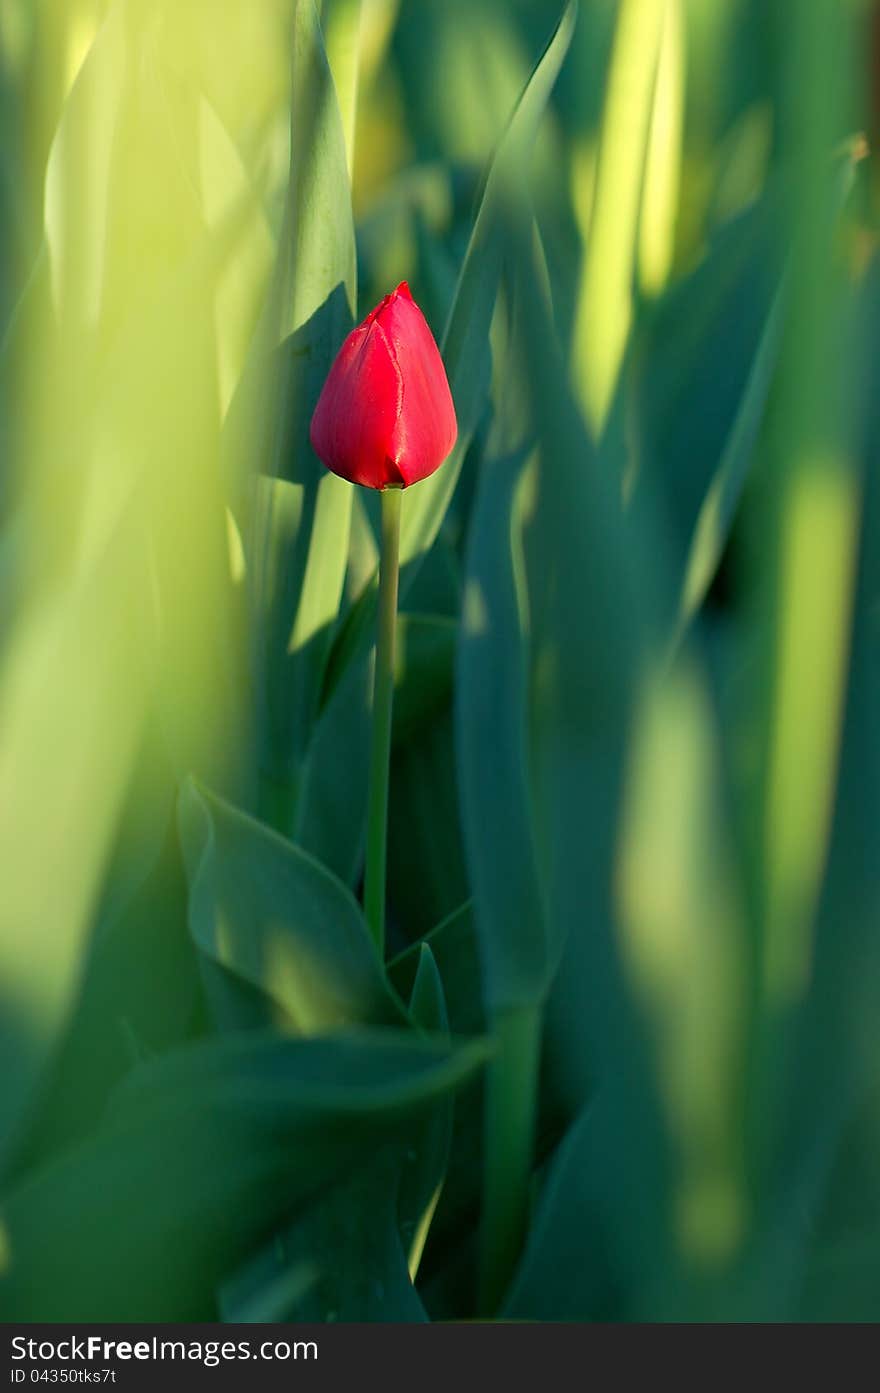 One red tulip flower, surrounded by green leaves